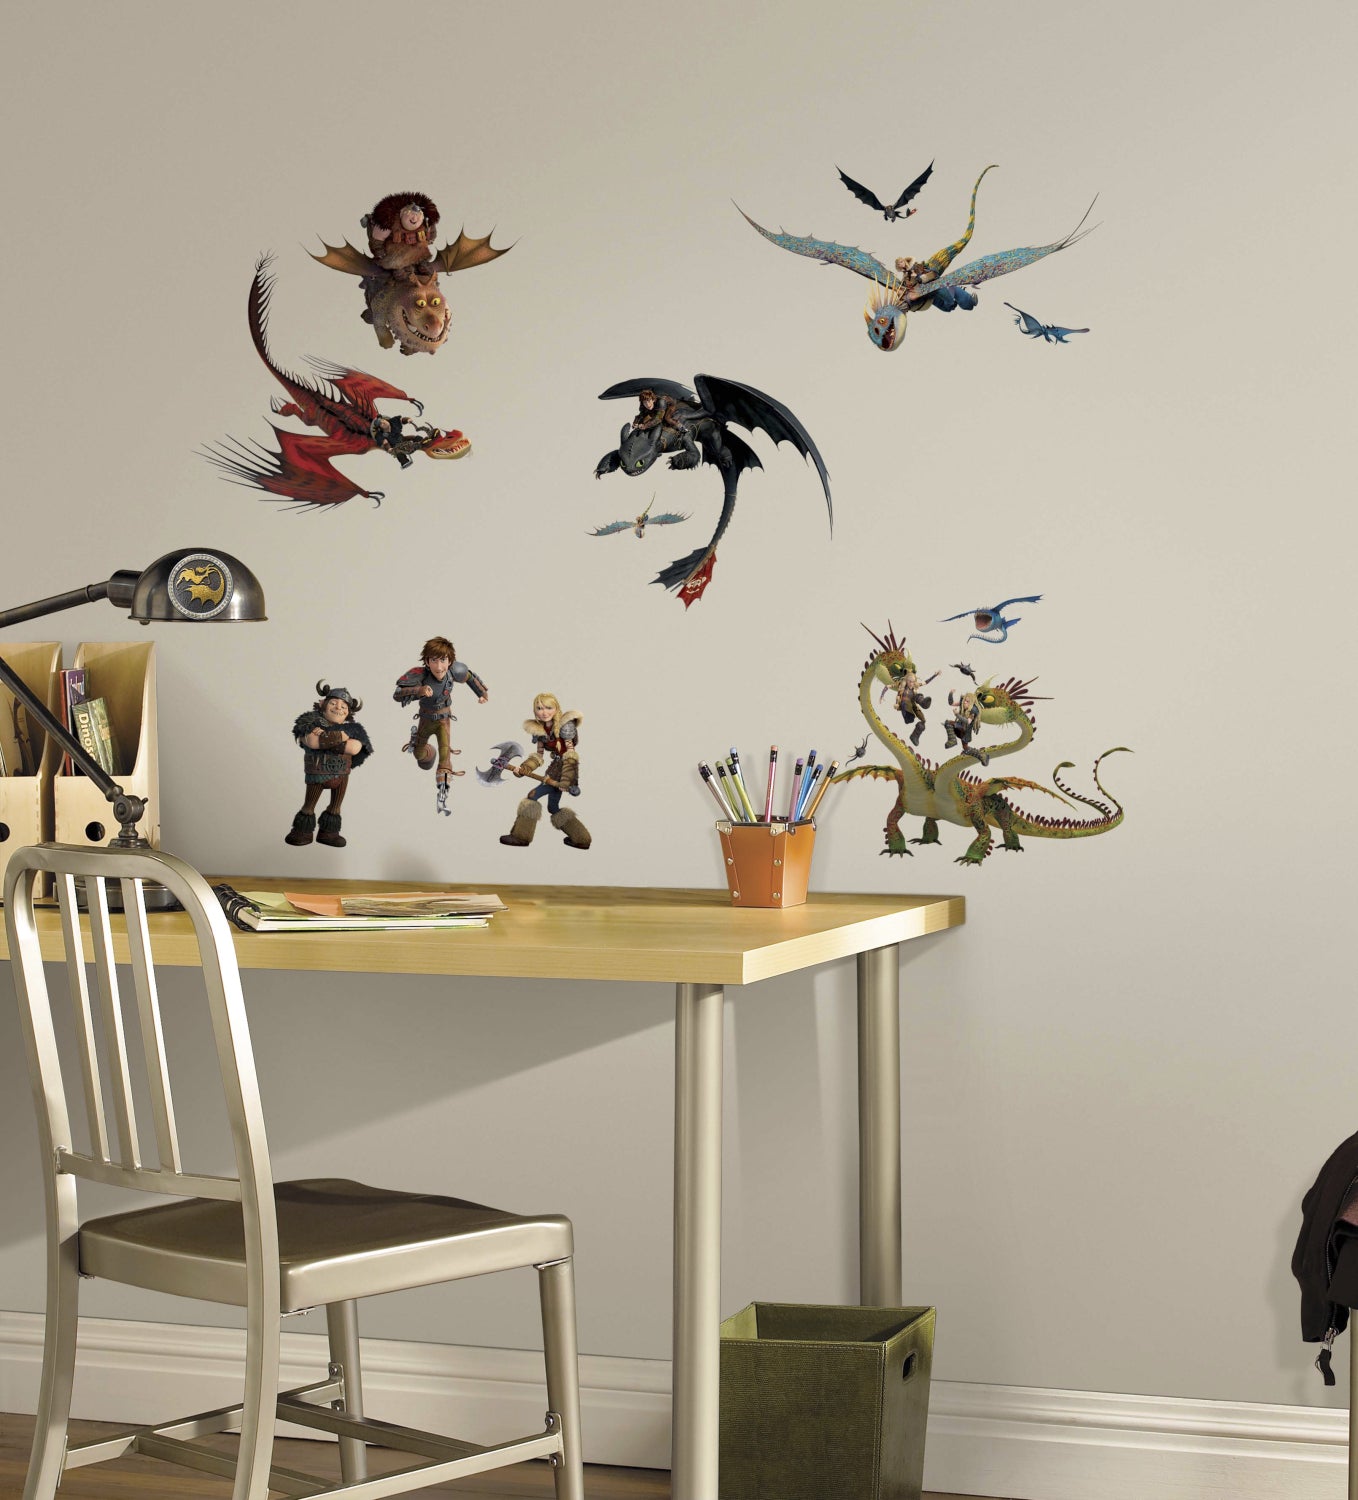 How to Train Your Dragon 2 Peel and Stick Wall Decals